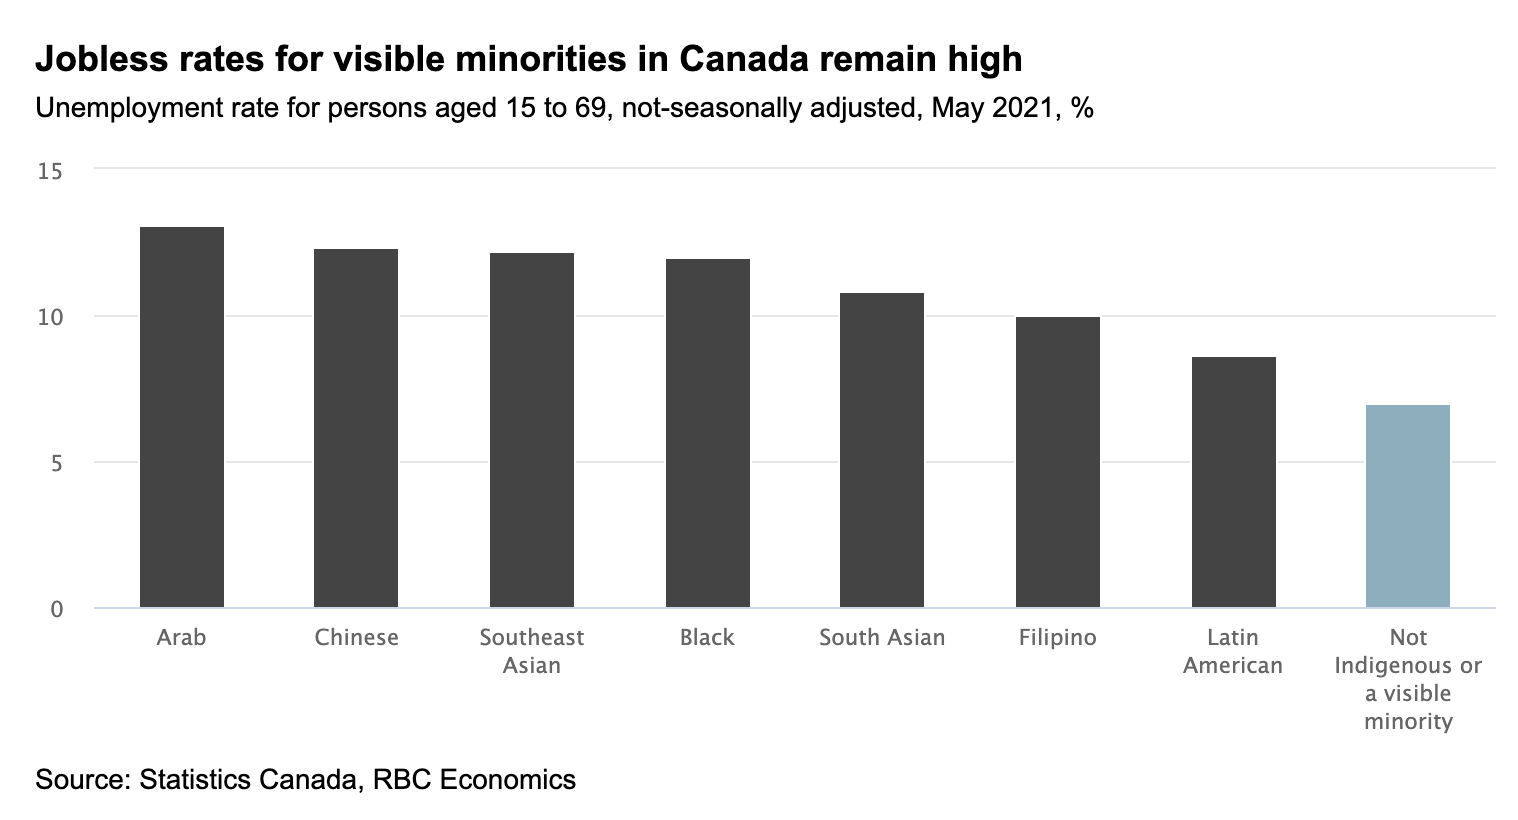 Jobless rates for visible minorities